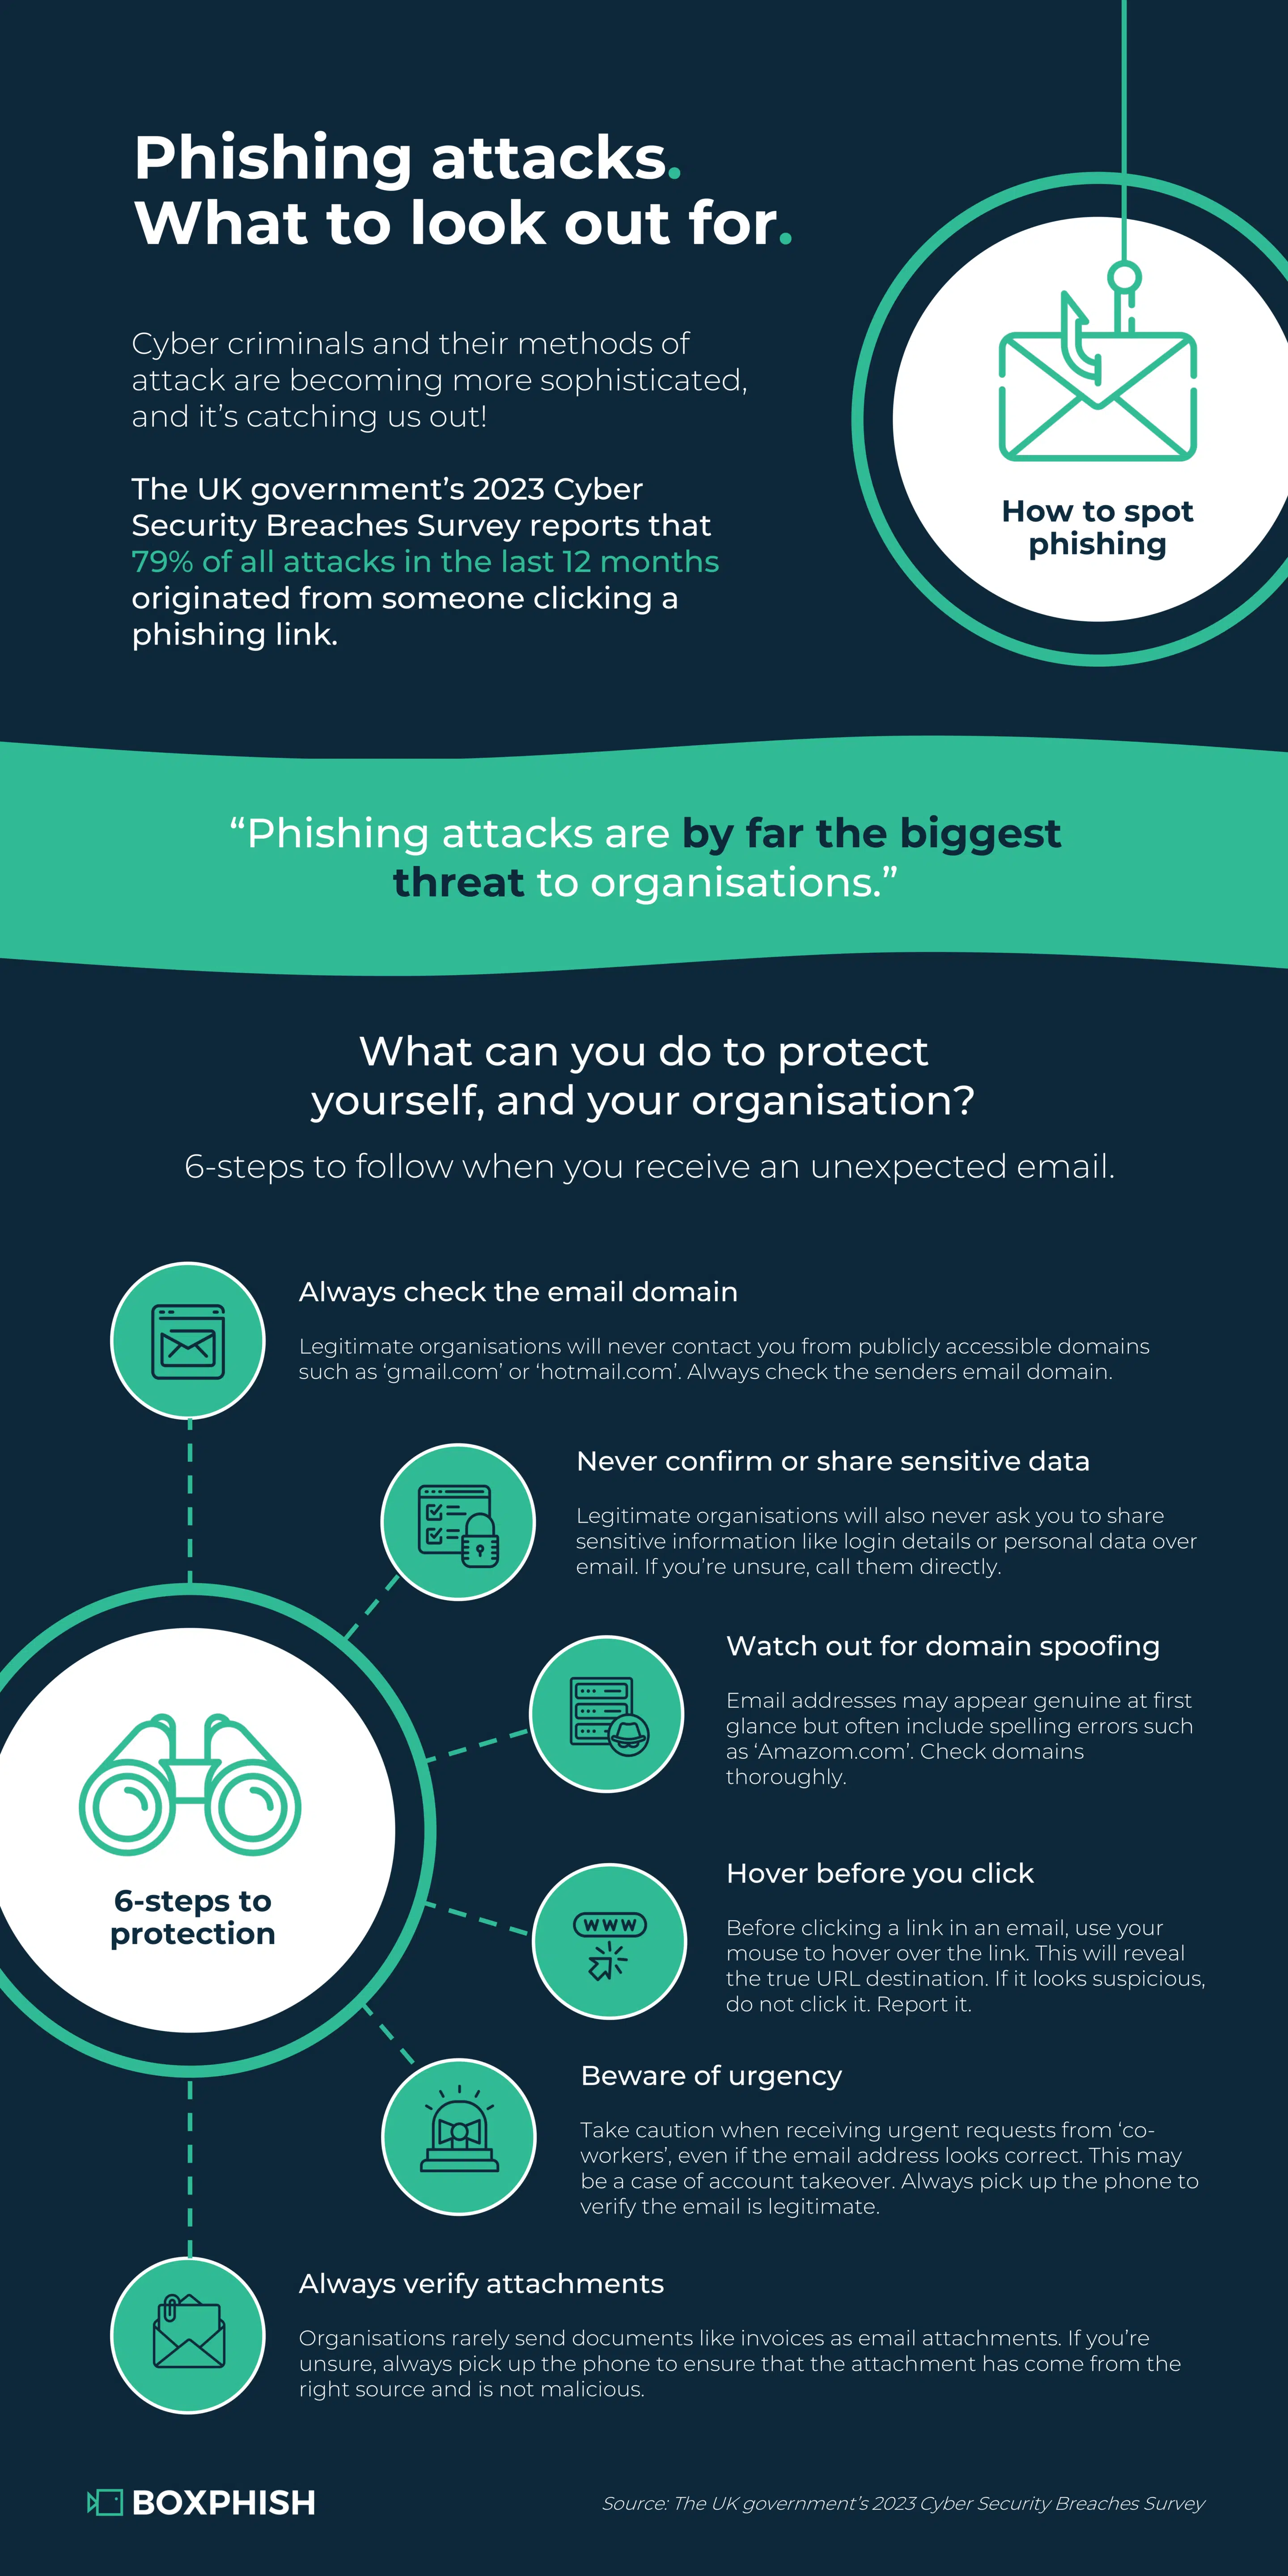 How to spot phishing attacks infographic 1